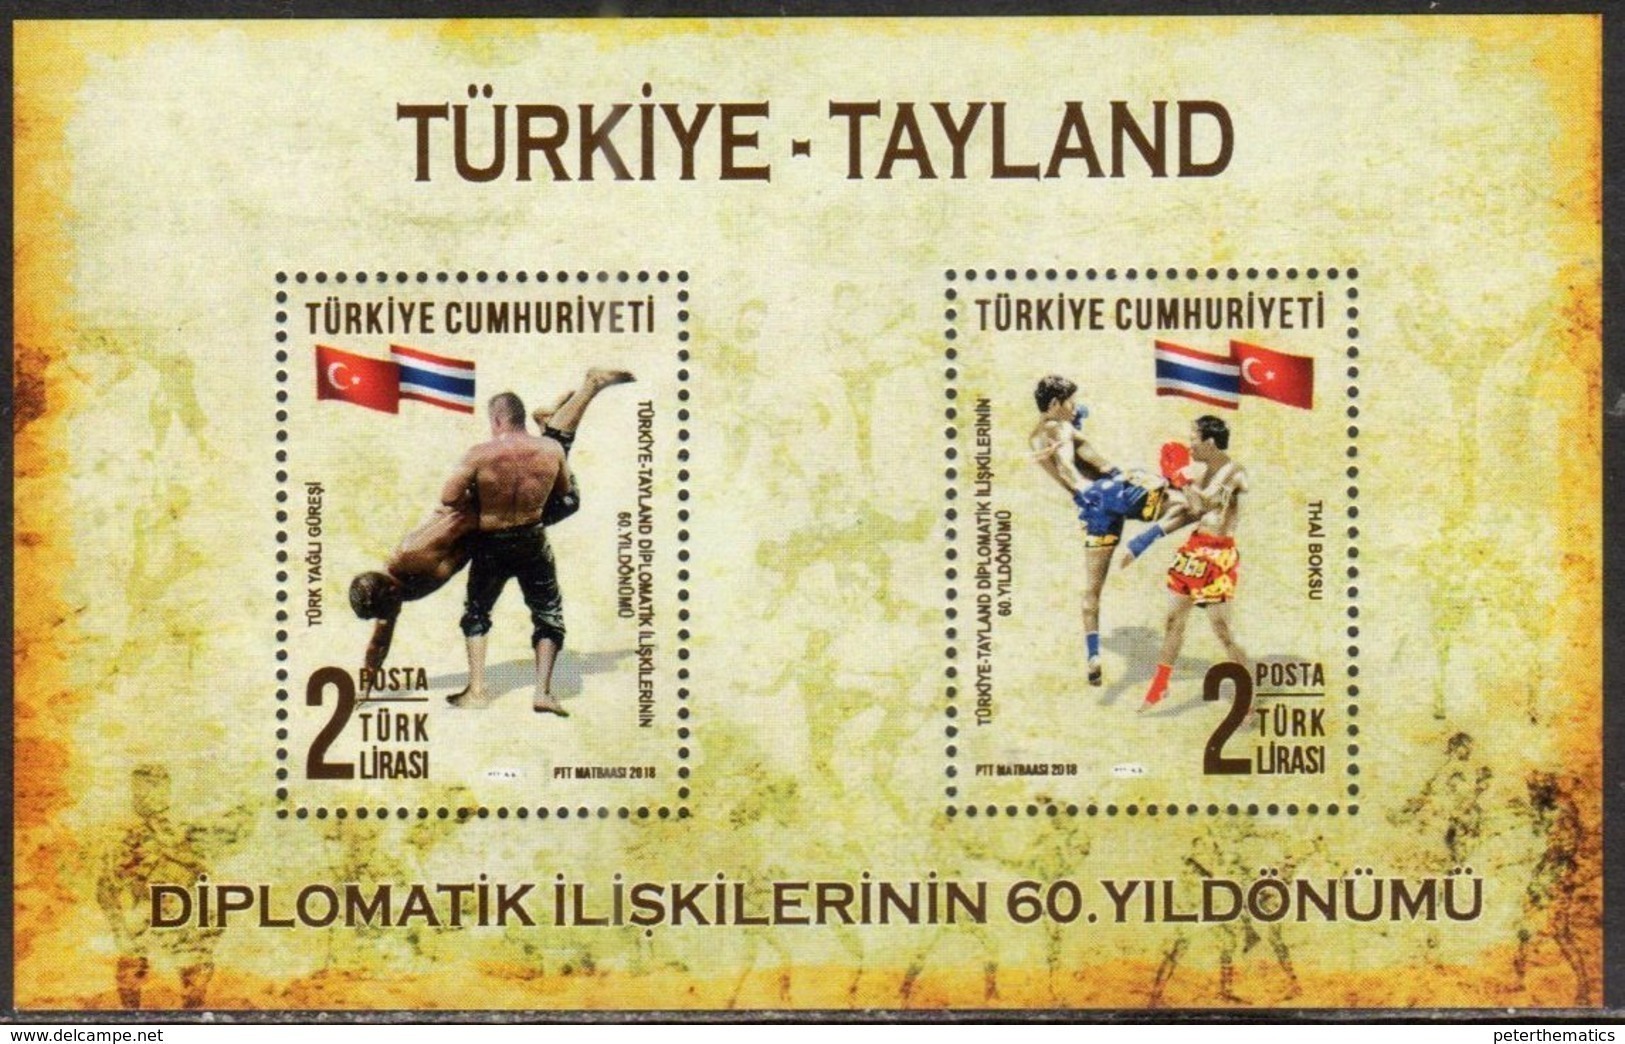 TURKEY , 2018, MNH, JOINT ISSUE WITH THAILAND, DIPLOMATIC RELATIONS WITH THAILAND, WRESTLING,  SHEETLET - Joint Issues